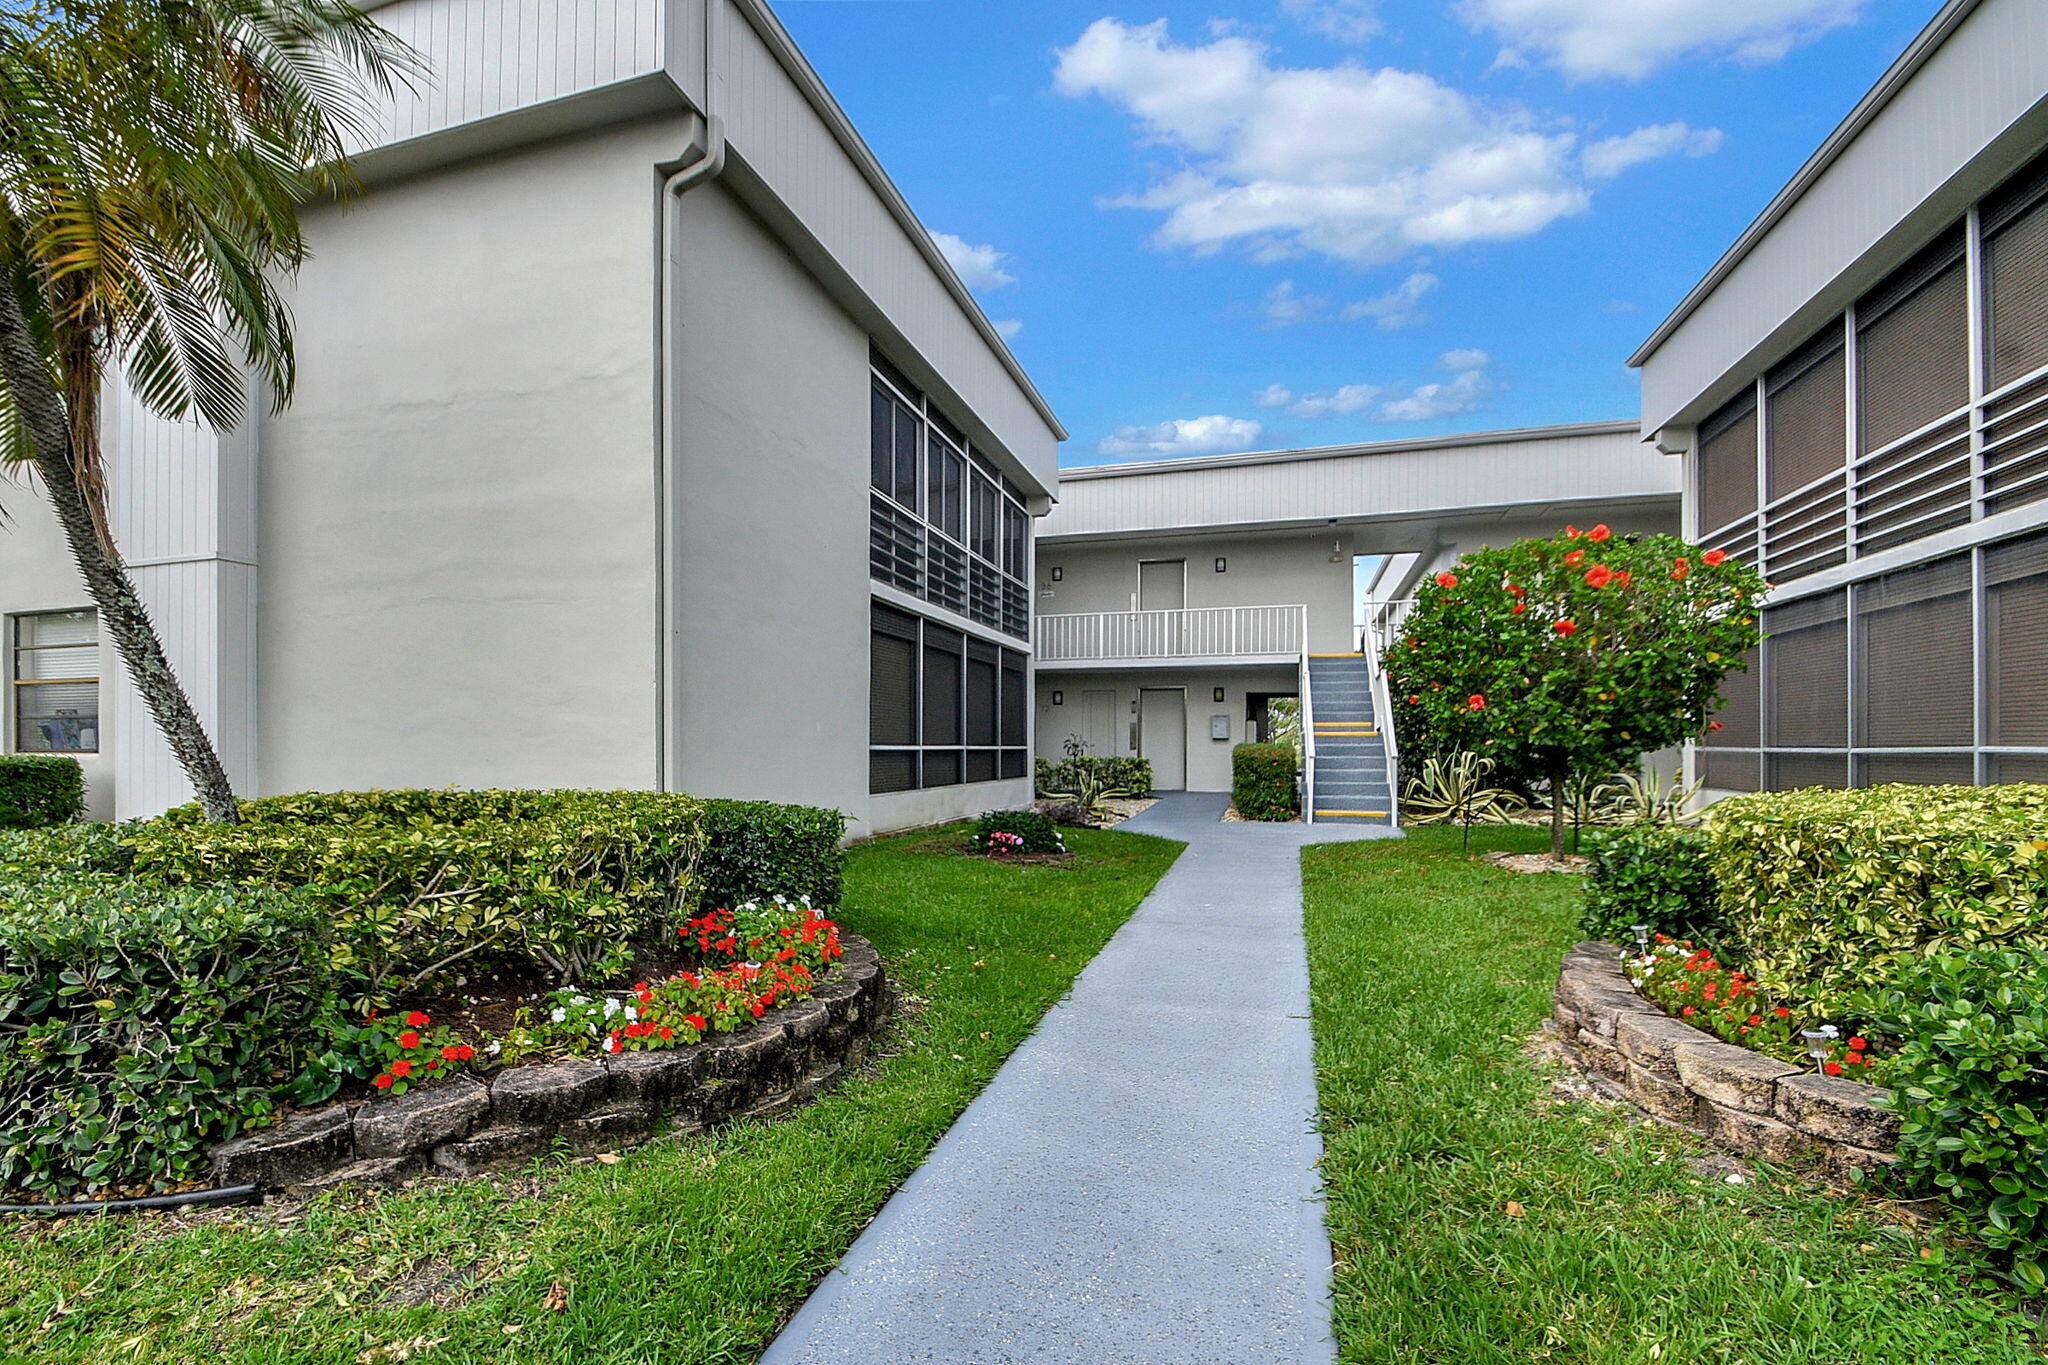 Come enjoy the Florida lifestyle in the gated active community of Kings Point in Delray Beach.